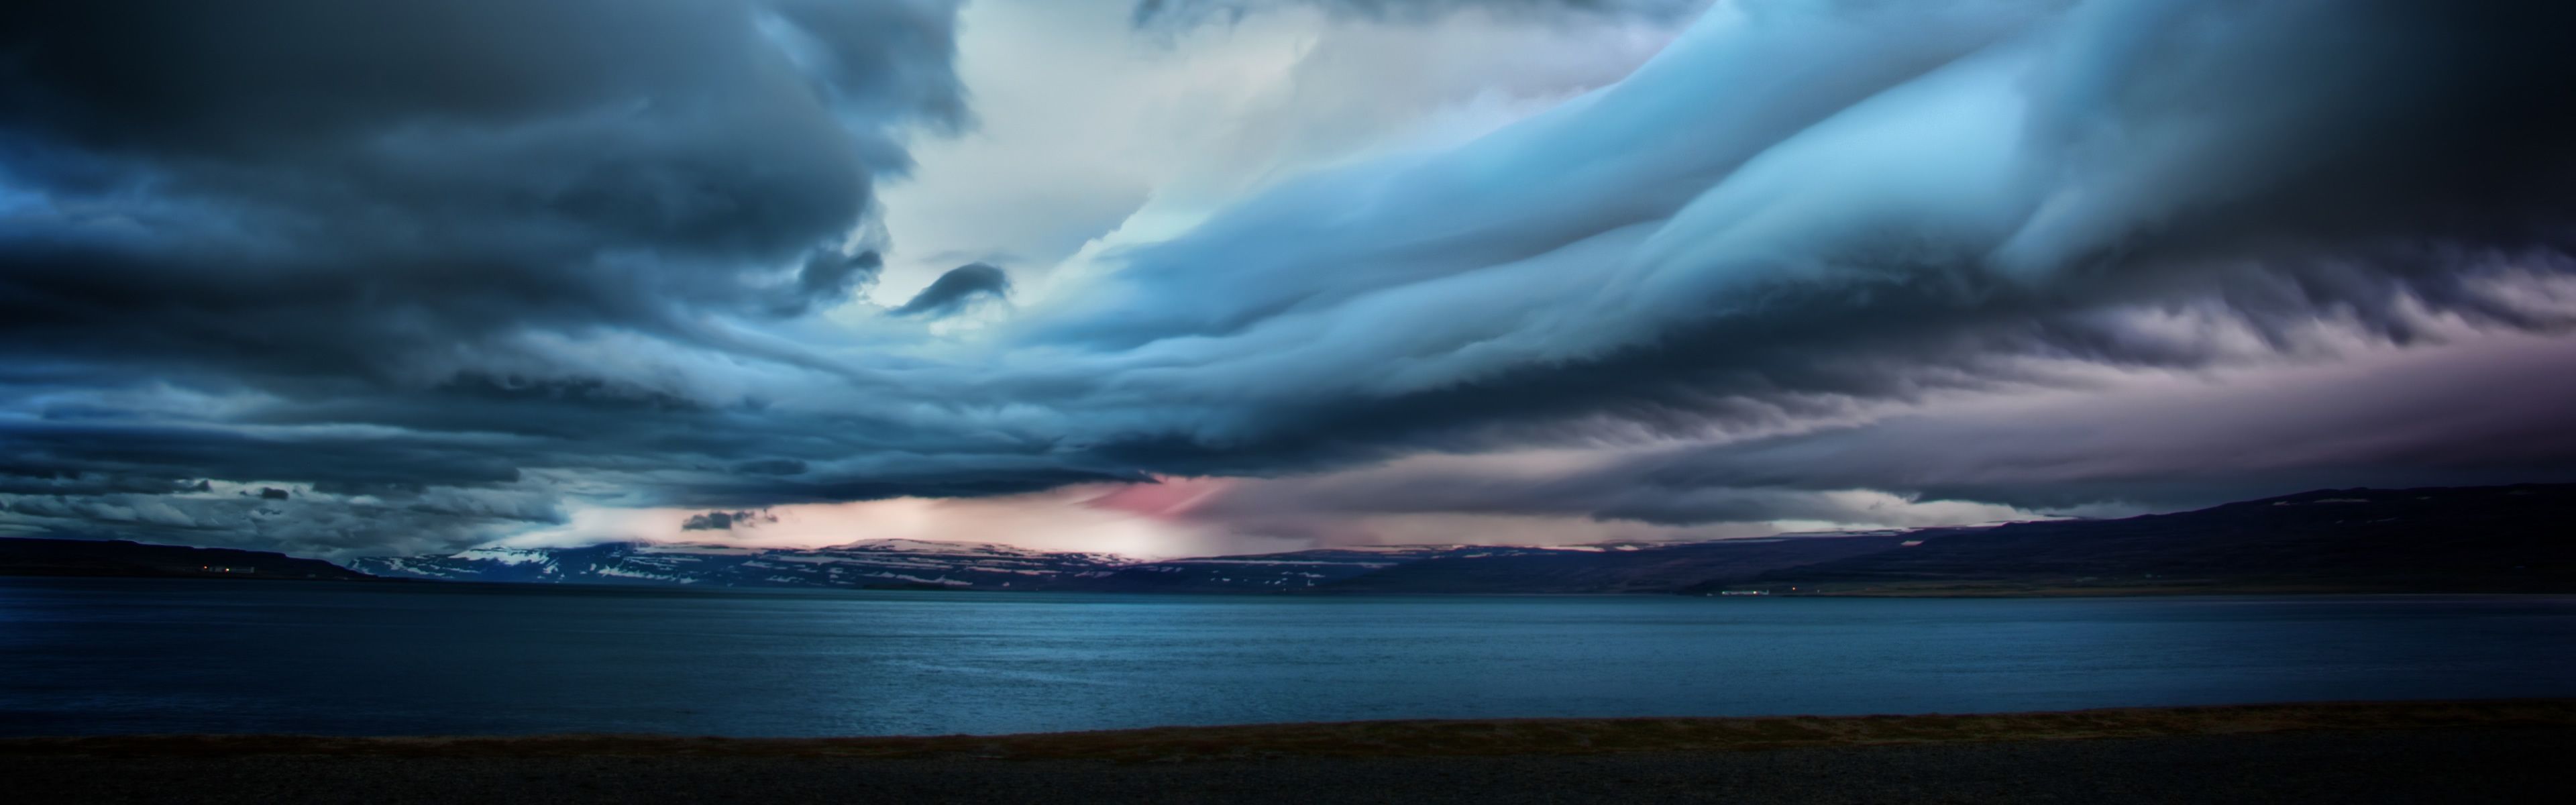 Stormy Clouds iPhone Panoramic Wallpaper Download iPad